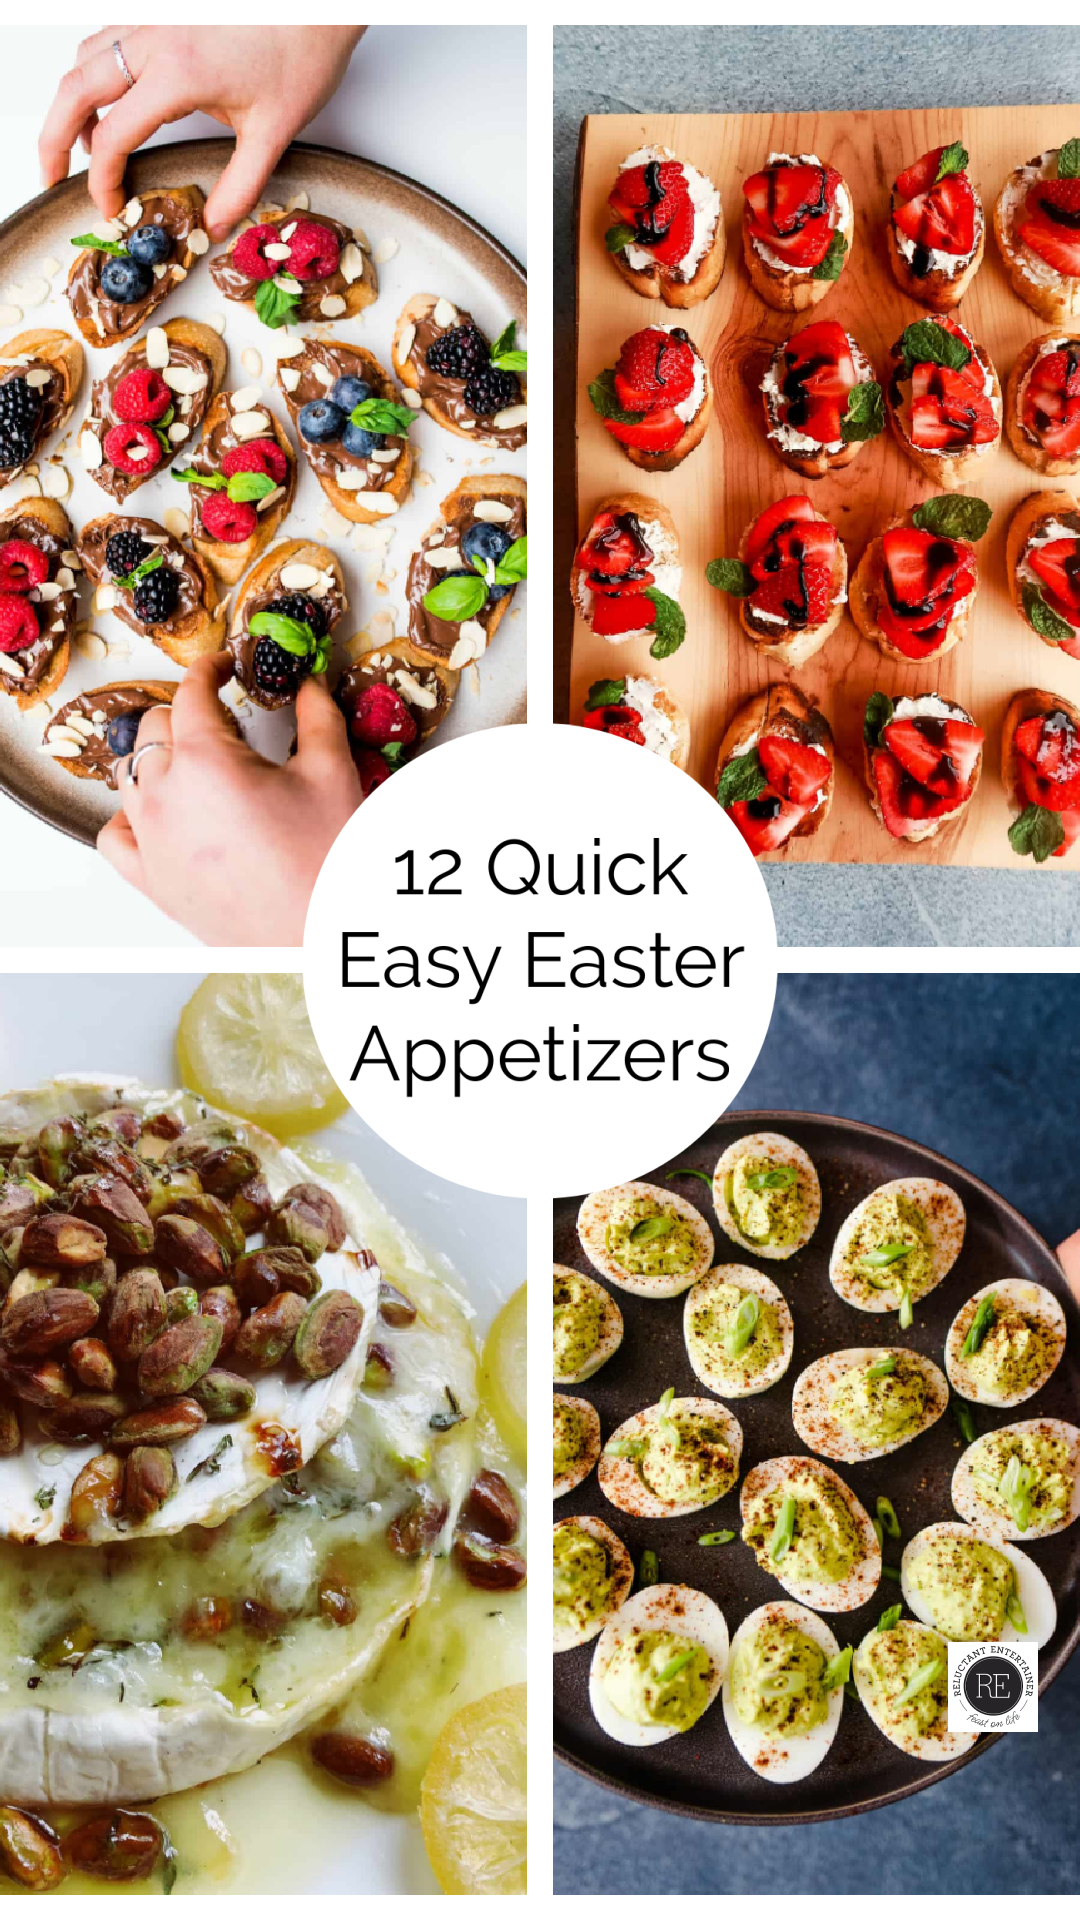 12 Quick & Easy Easter Appetizers - Reluctant Entertainer